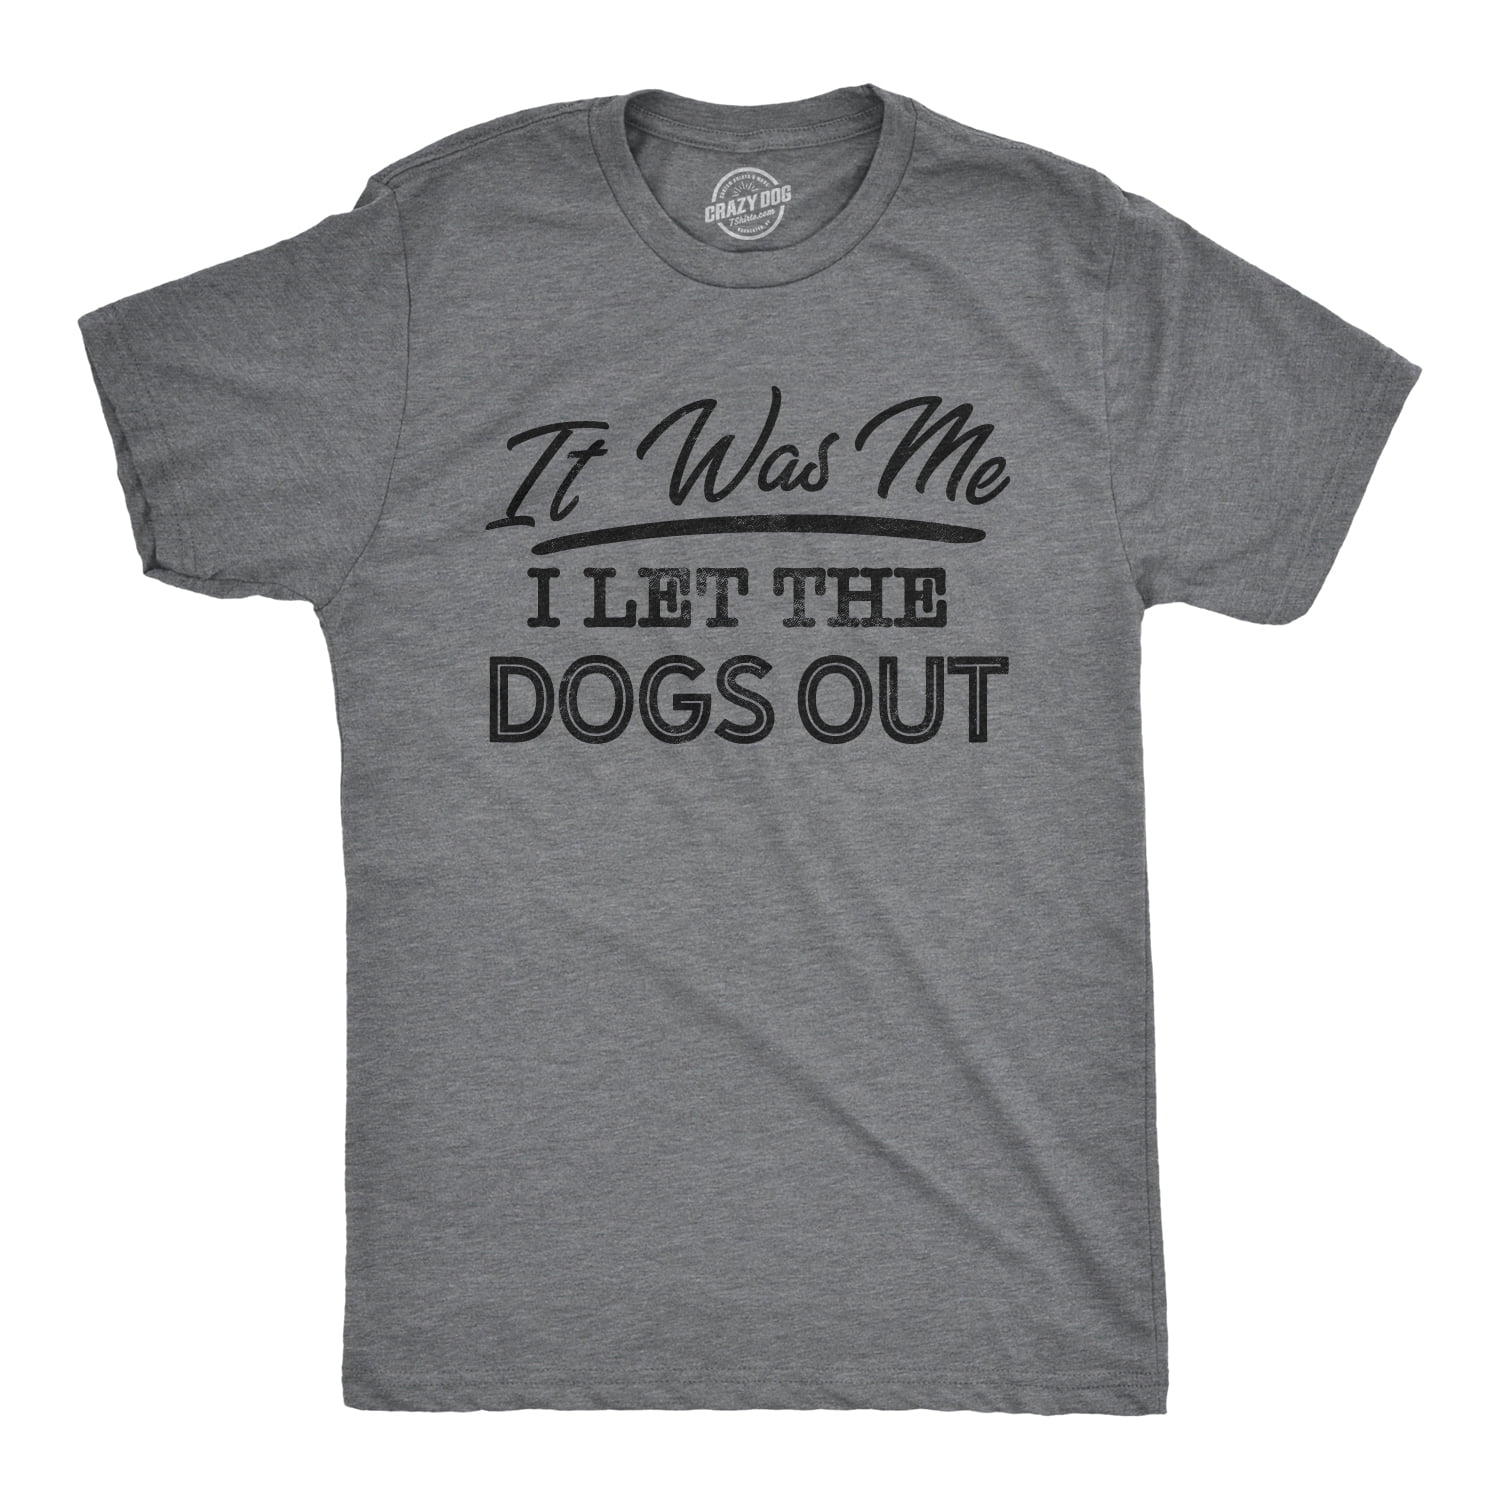 It was Me I Let The Dogs Out Adult Humor Graphic Novelty Sarcastic Funny T Shirt 